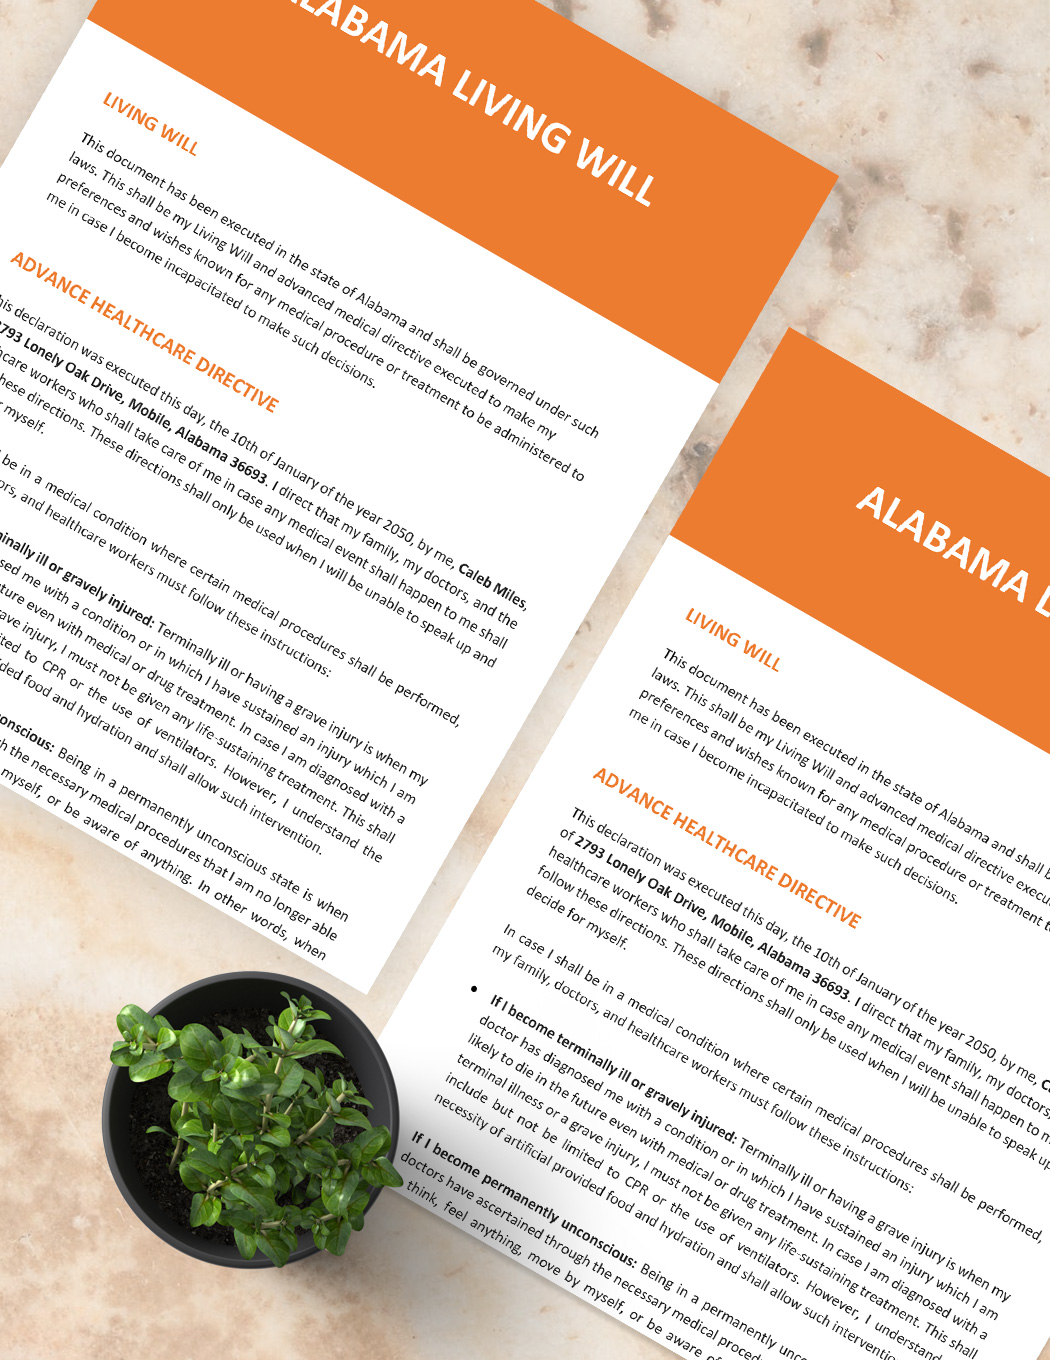 alabama-living-will-template-download-in-word-google-docs-template